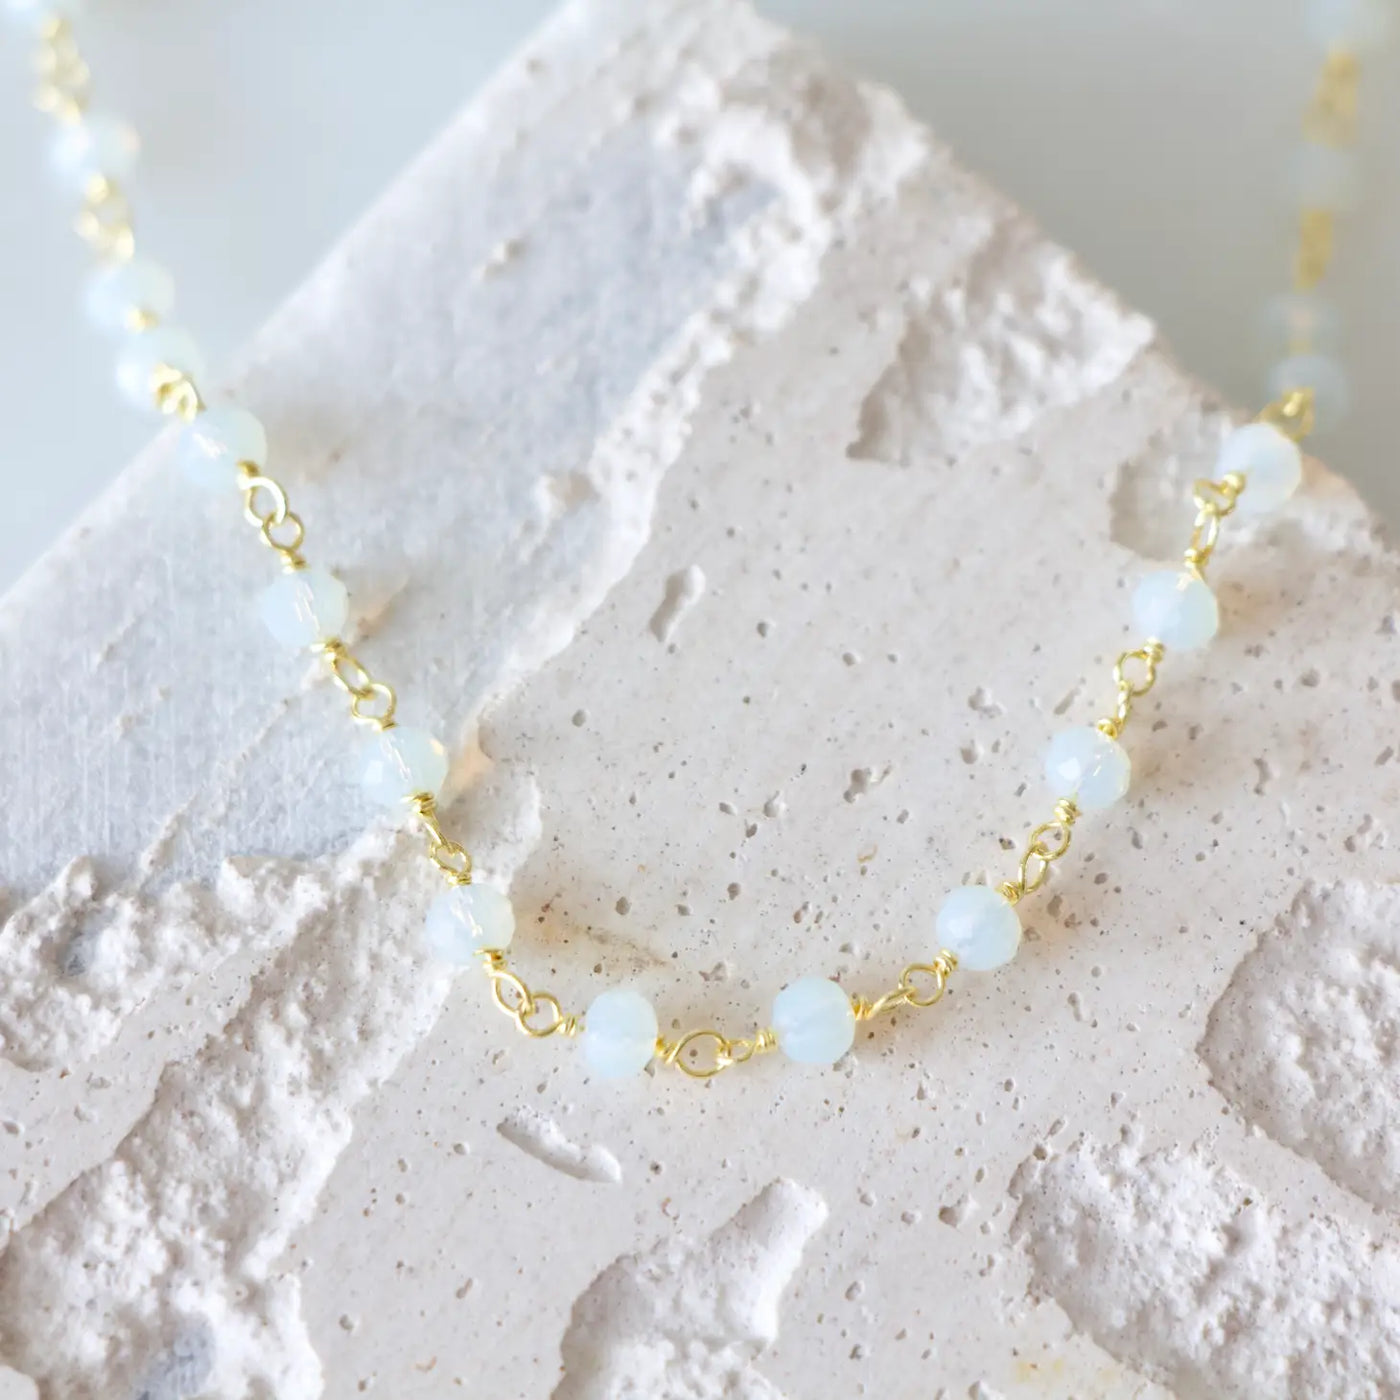 Opalite Beaded Necklace